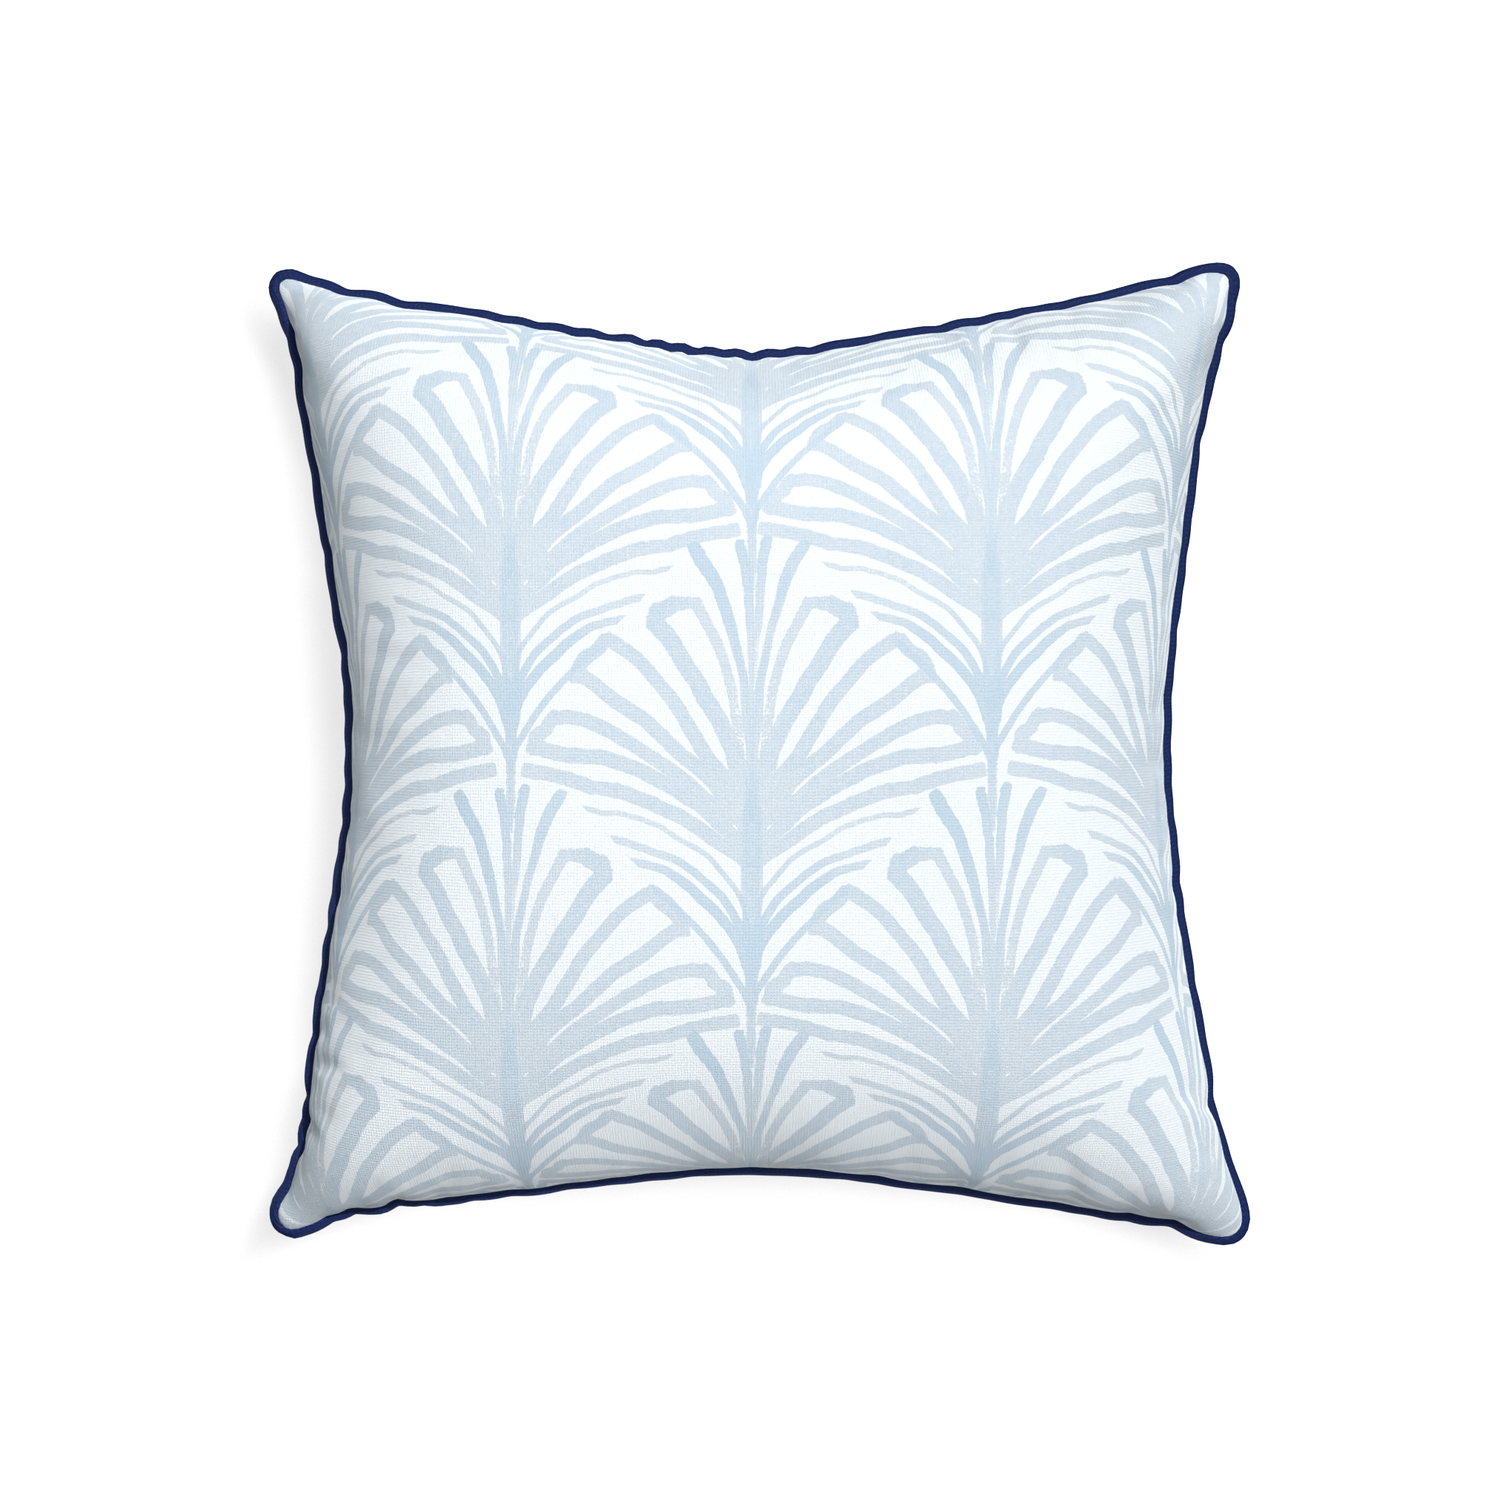 22-square suzy sky custom pillow with midnight piping on white background